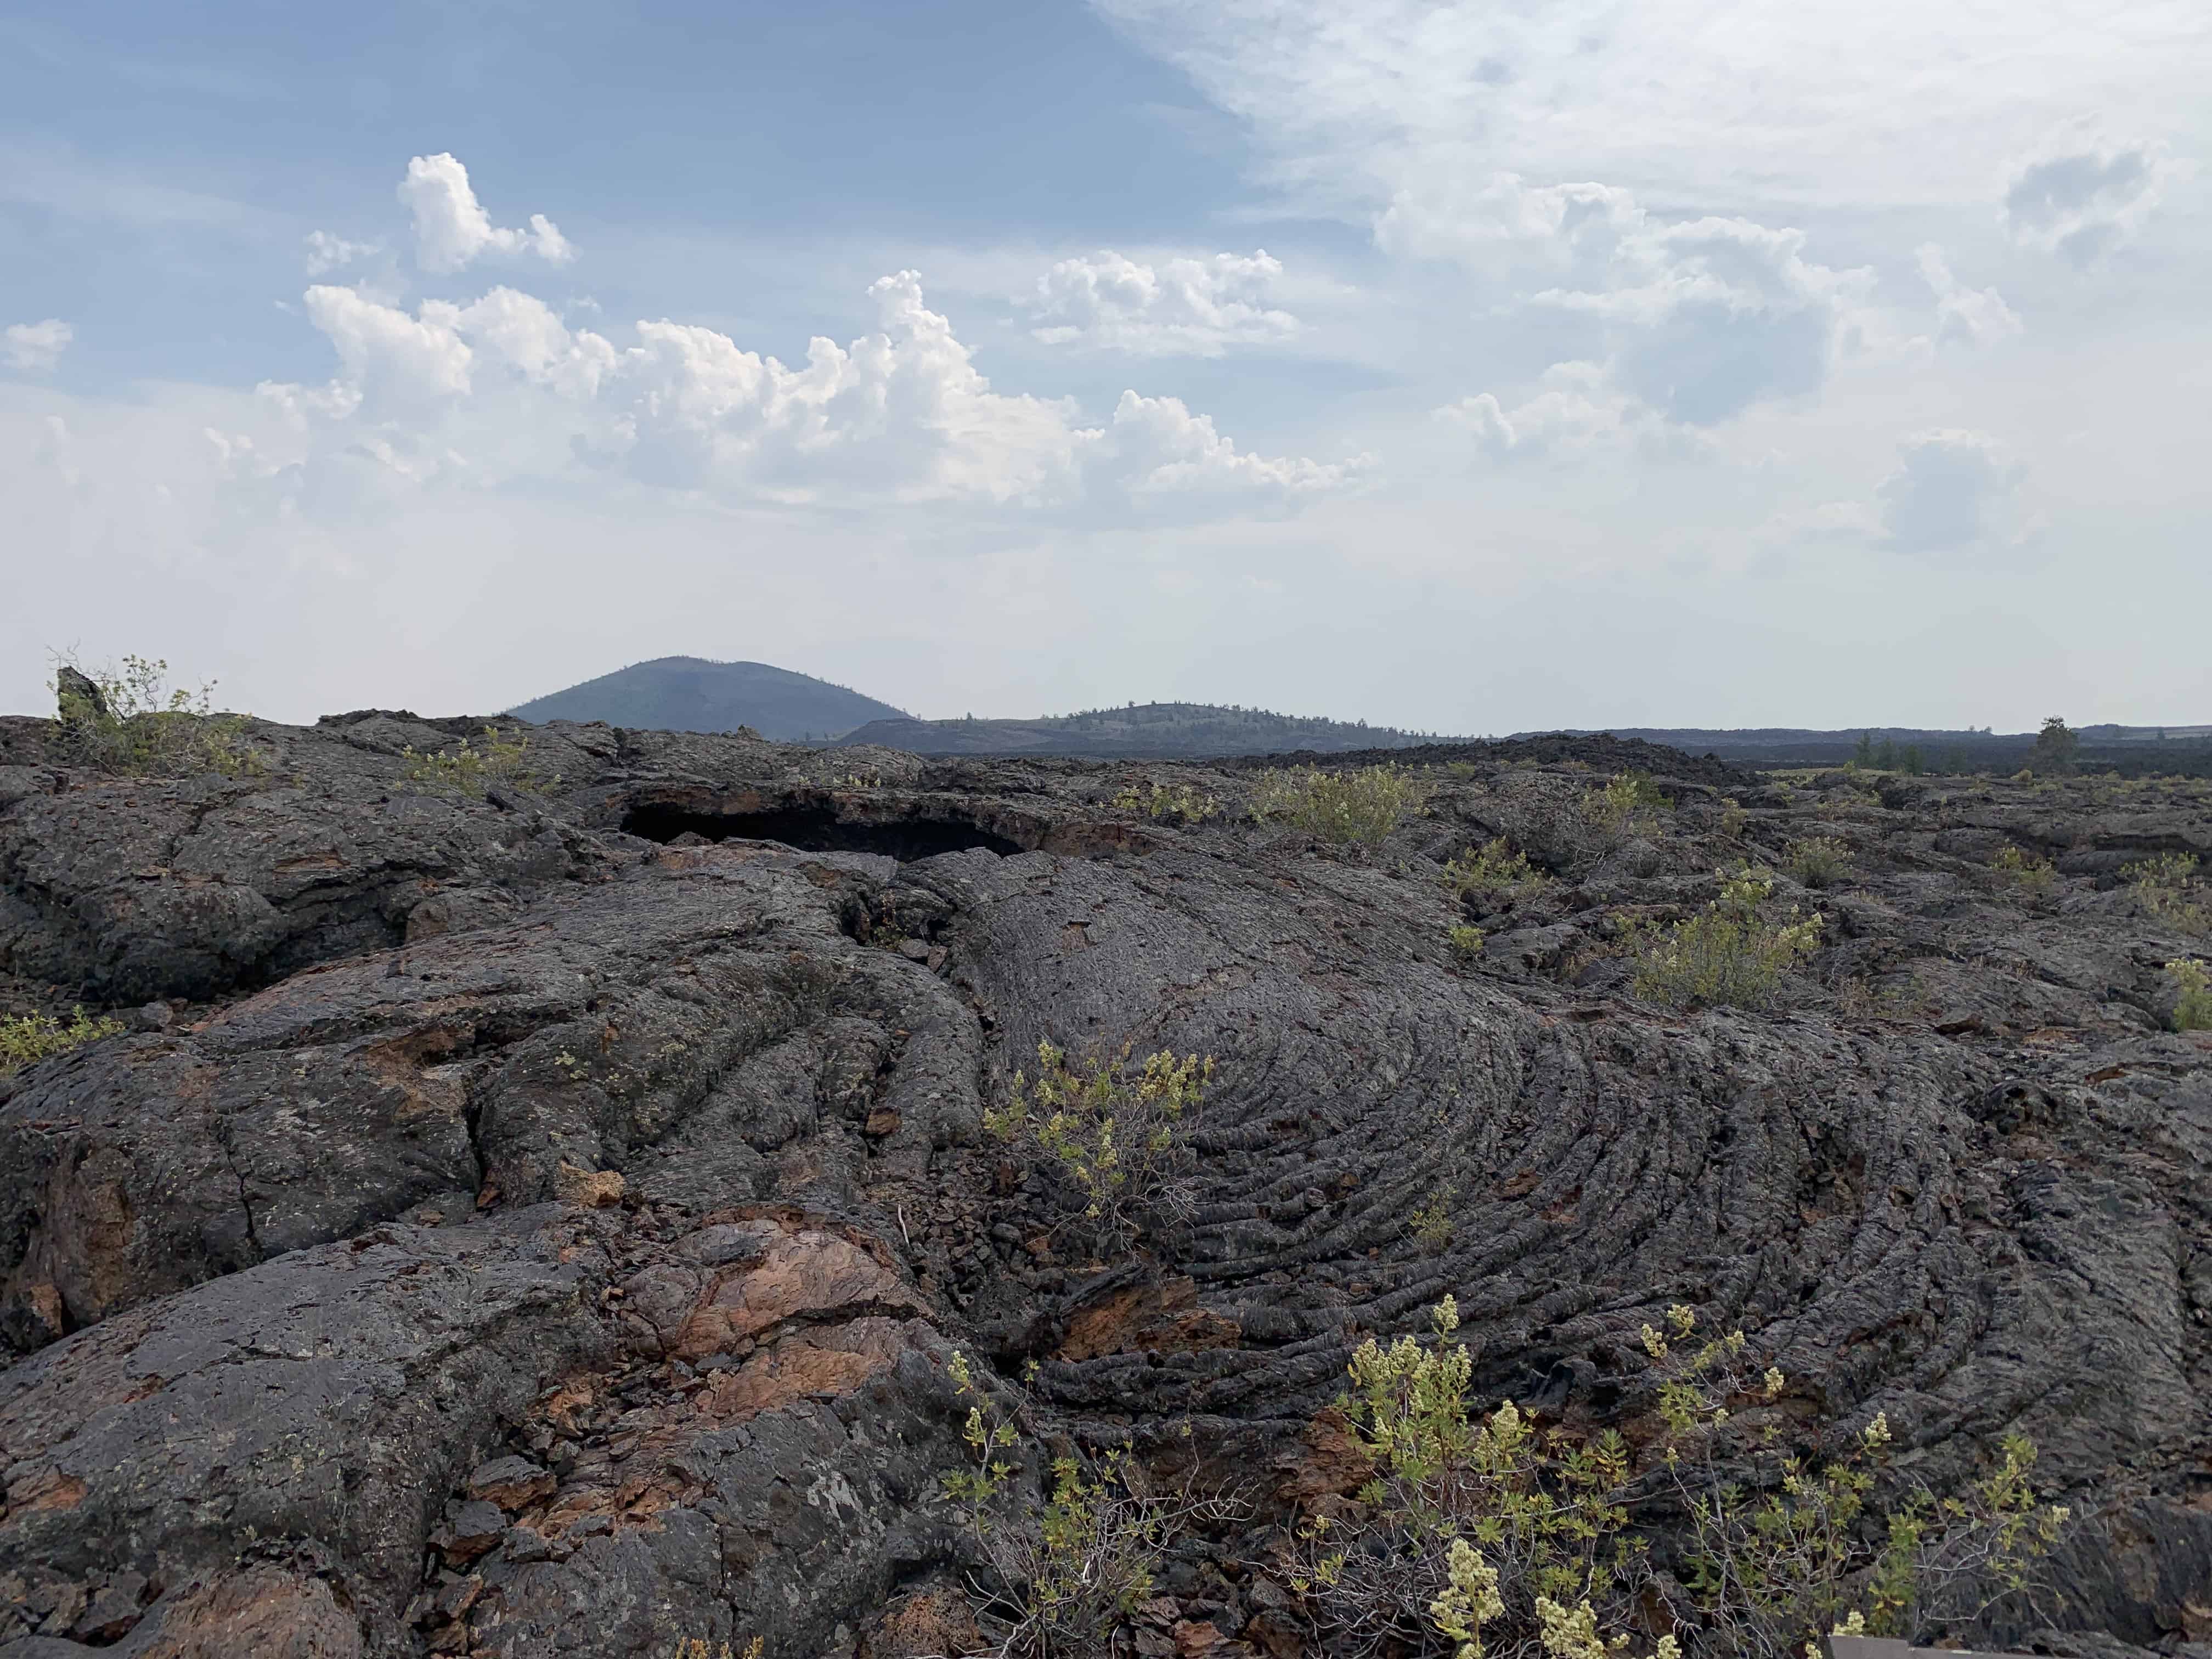 lava field with mountains in background. Craters of the Moon NM has so many volcanic features!